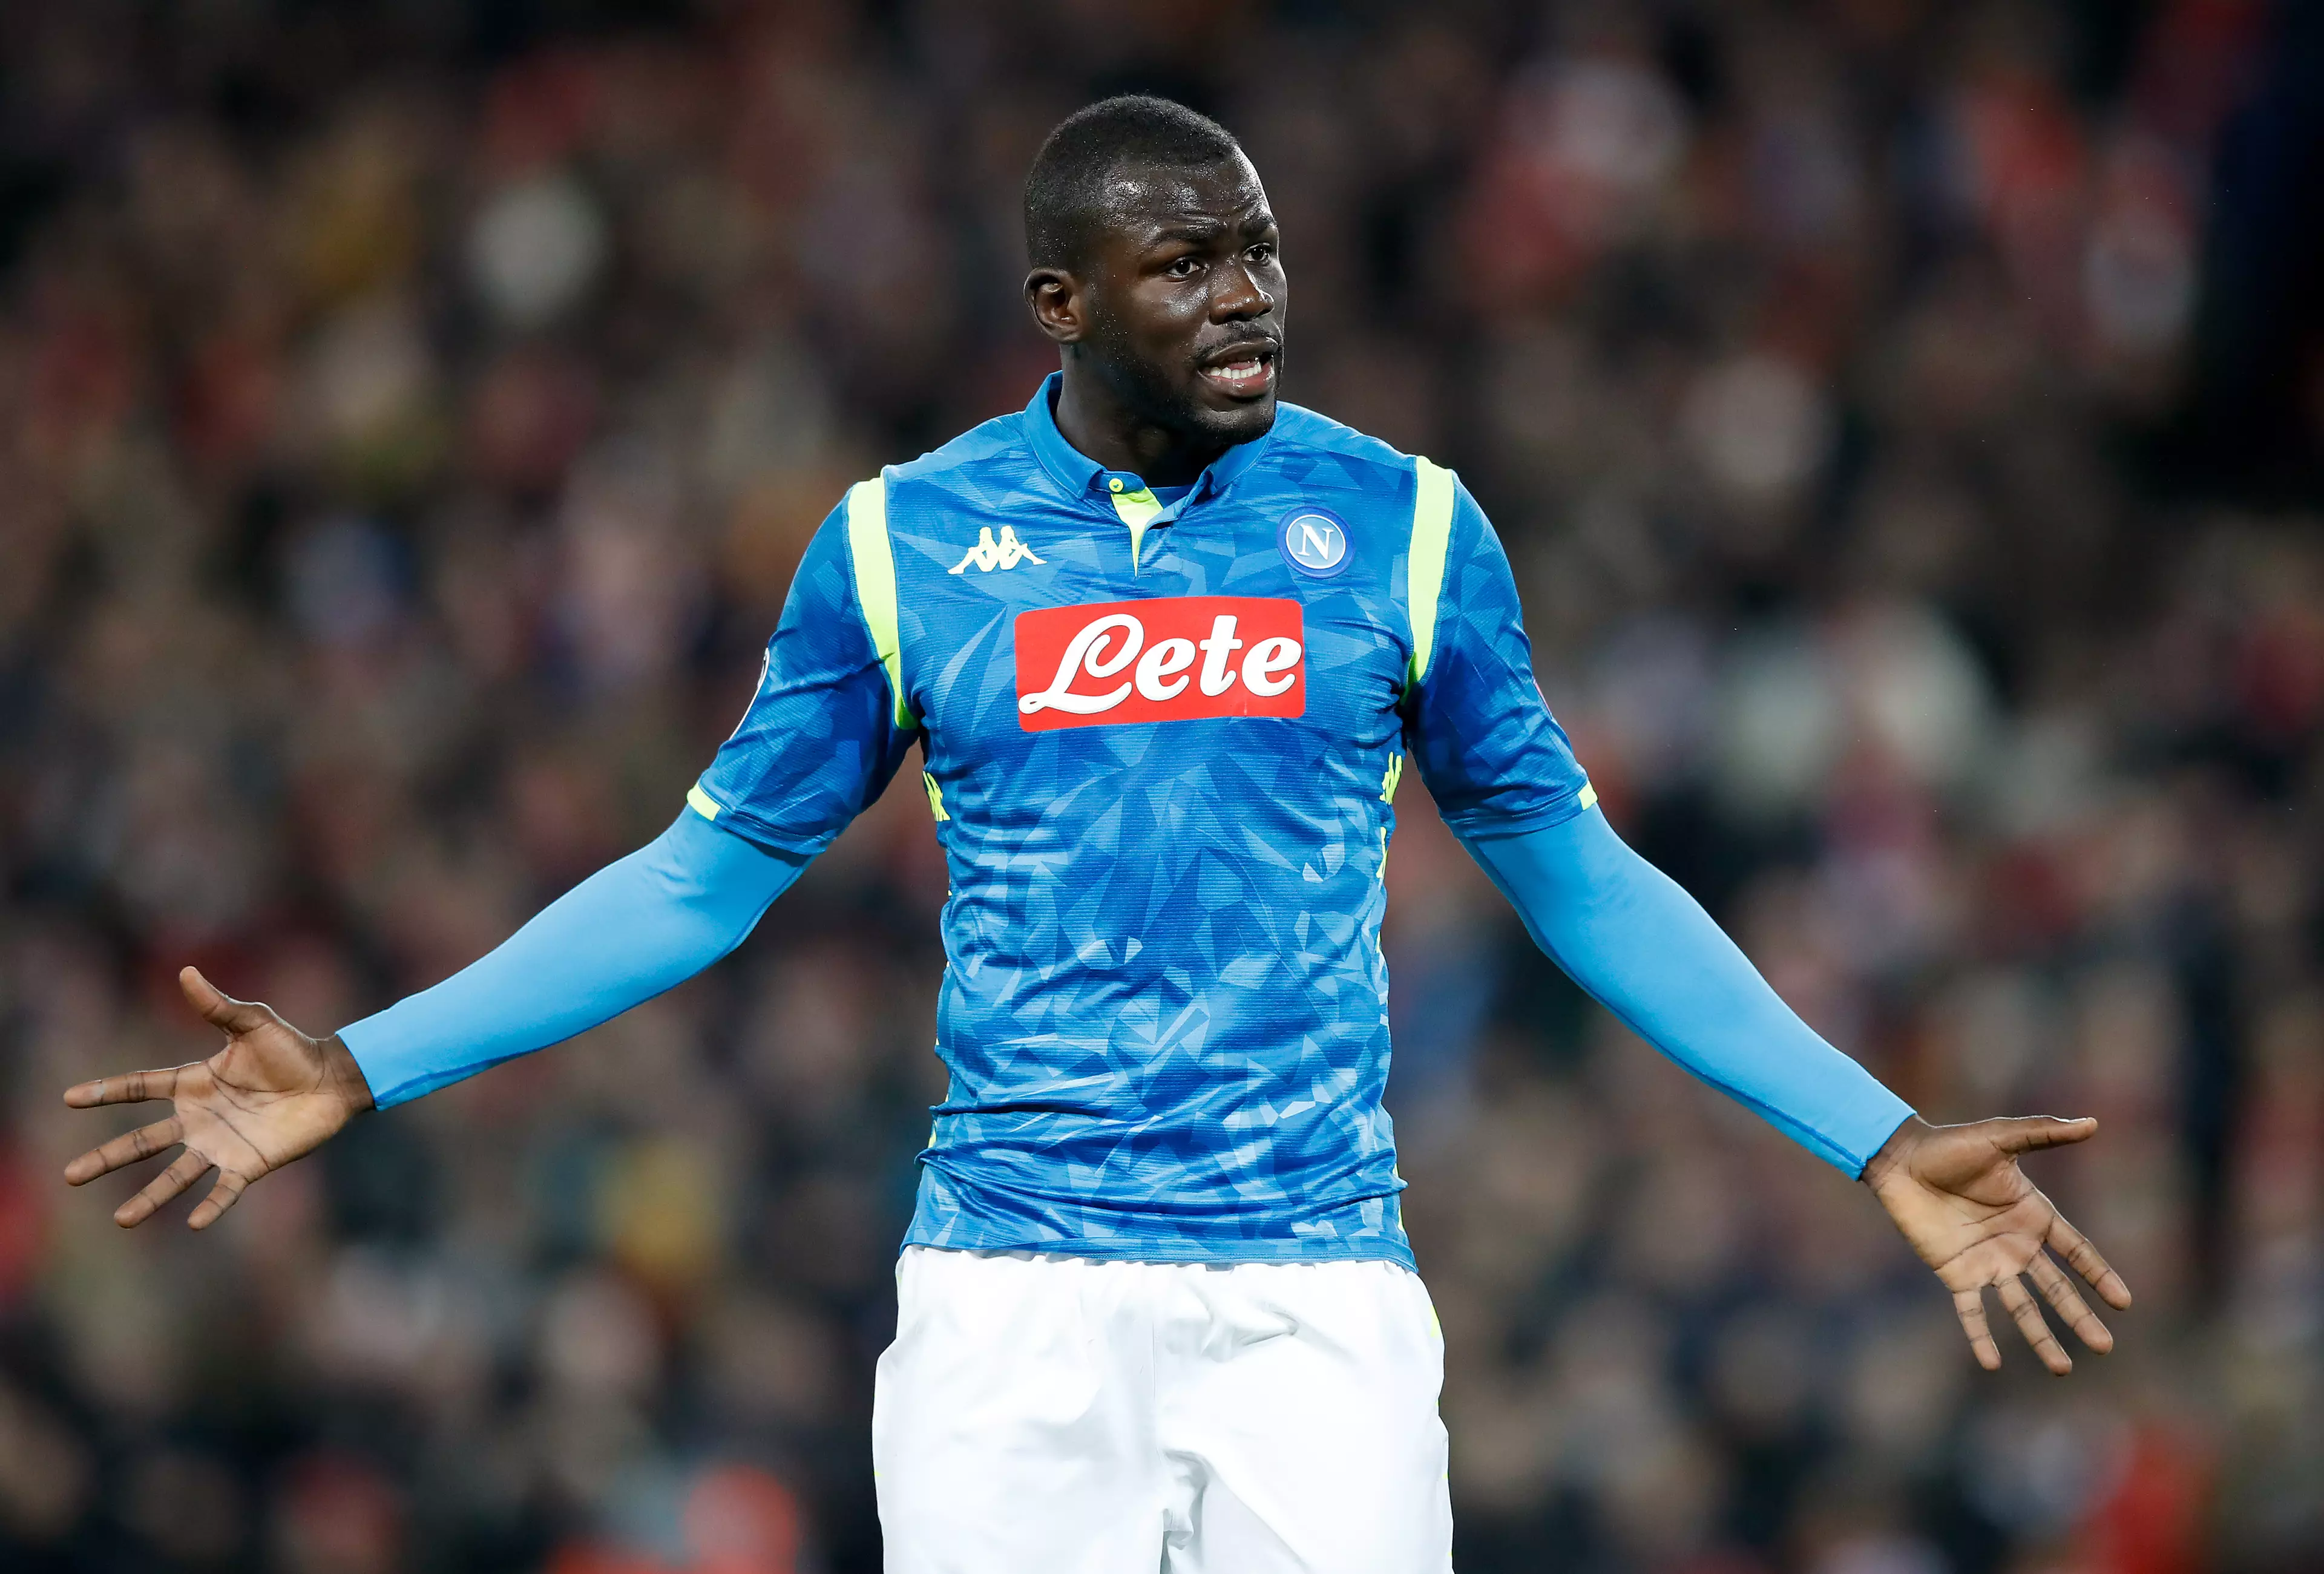 Koulibaly has also been linked with a move from Napoli to Newcastle. Image: PA Images